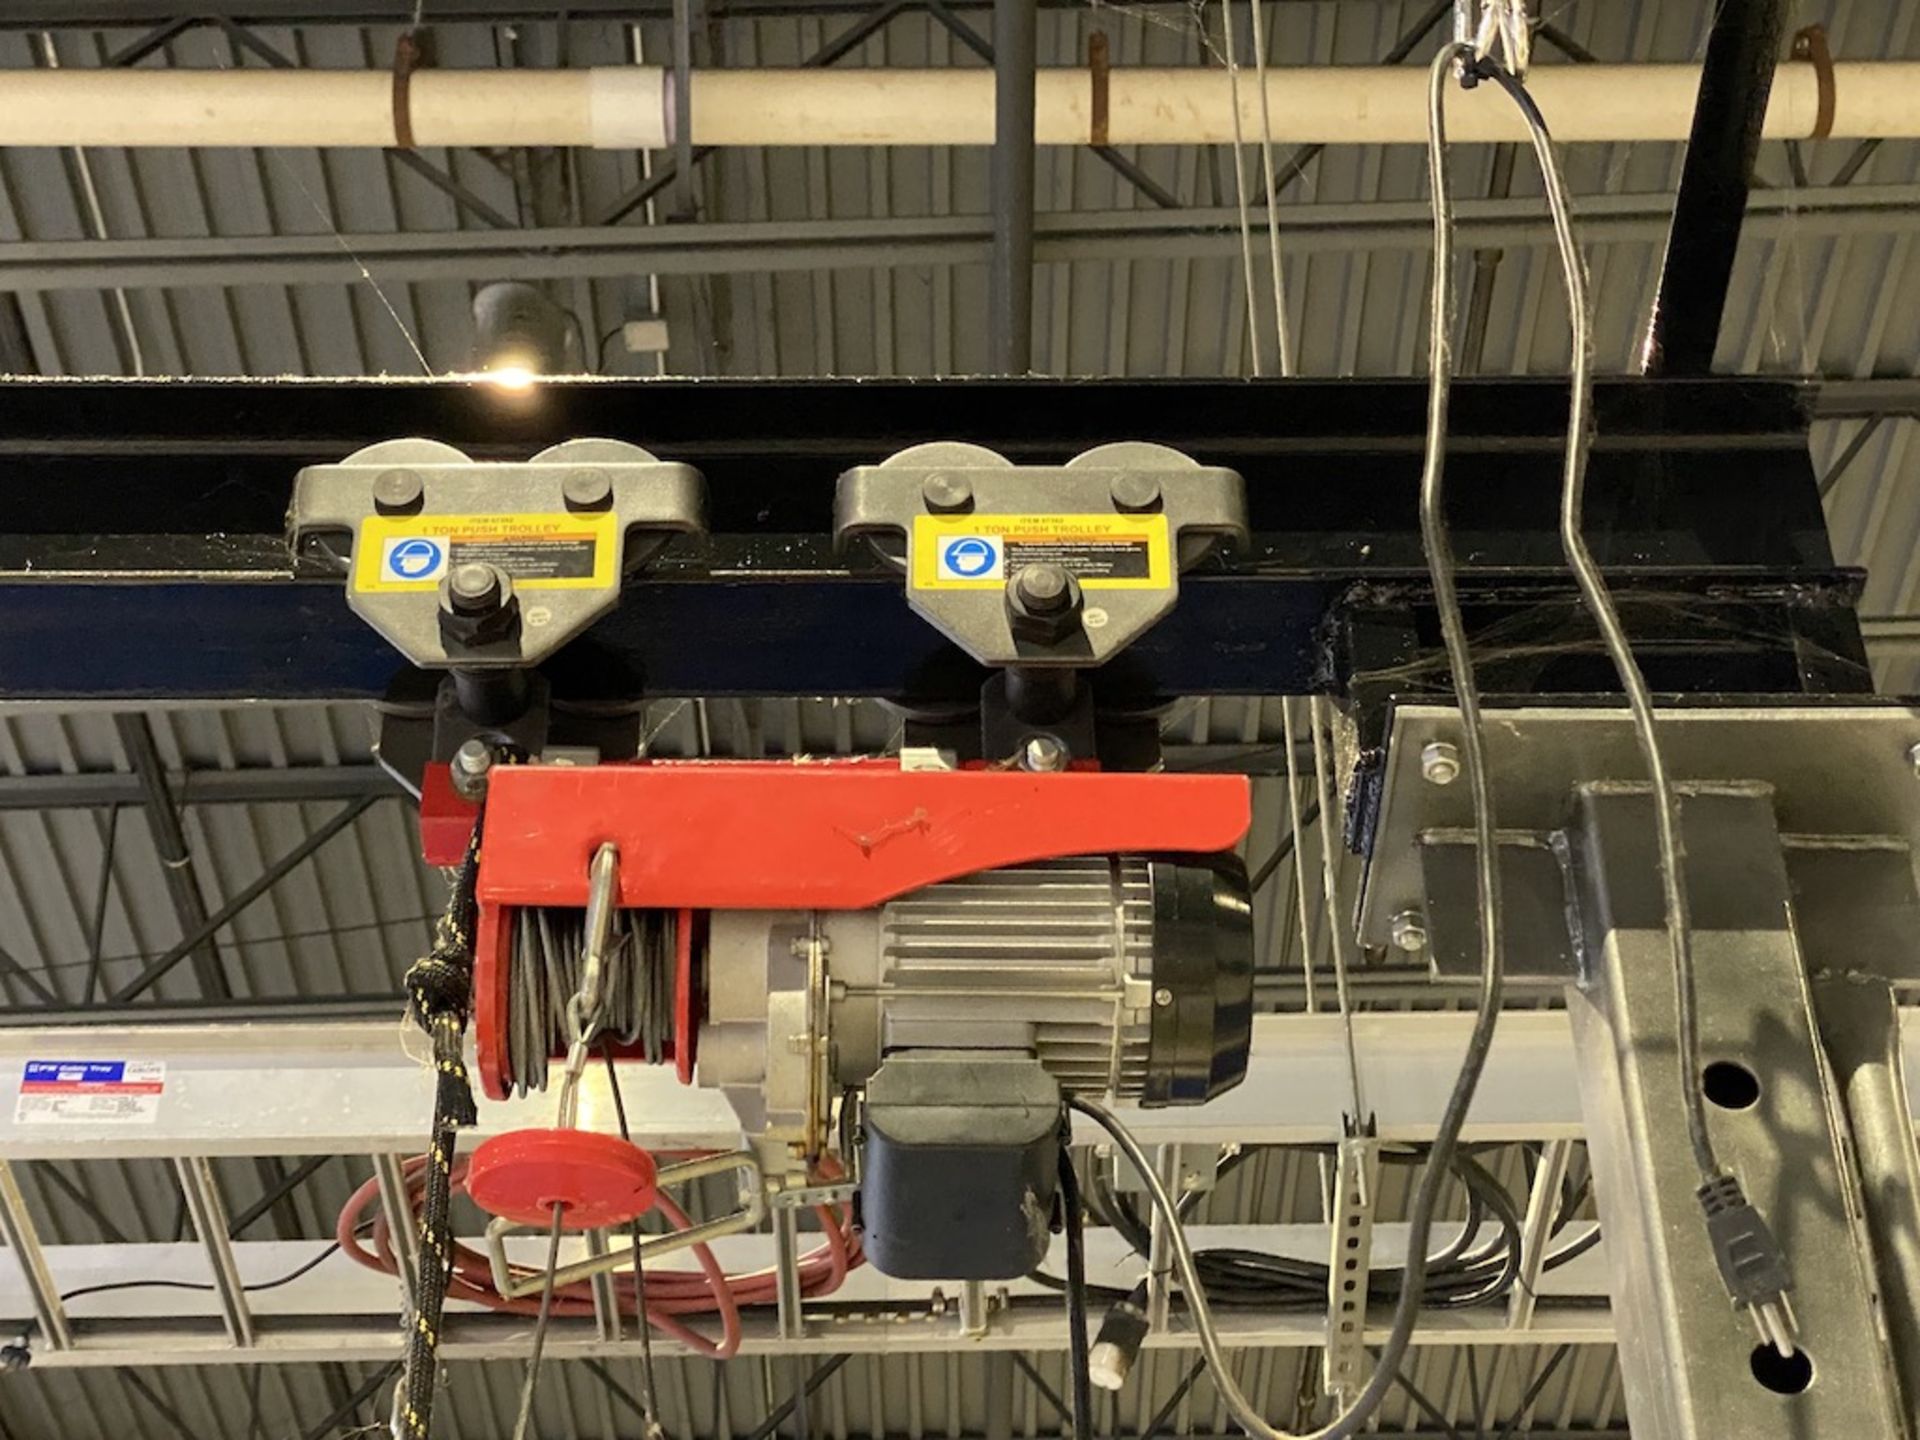 Mobile Adjustable Height Gantry Crane on Casters with Hoist & Controller - Image 4 of 5